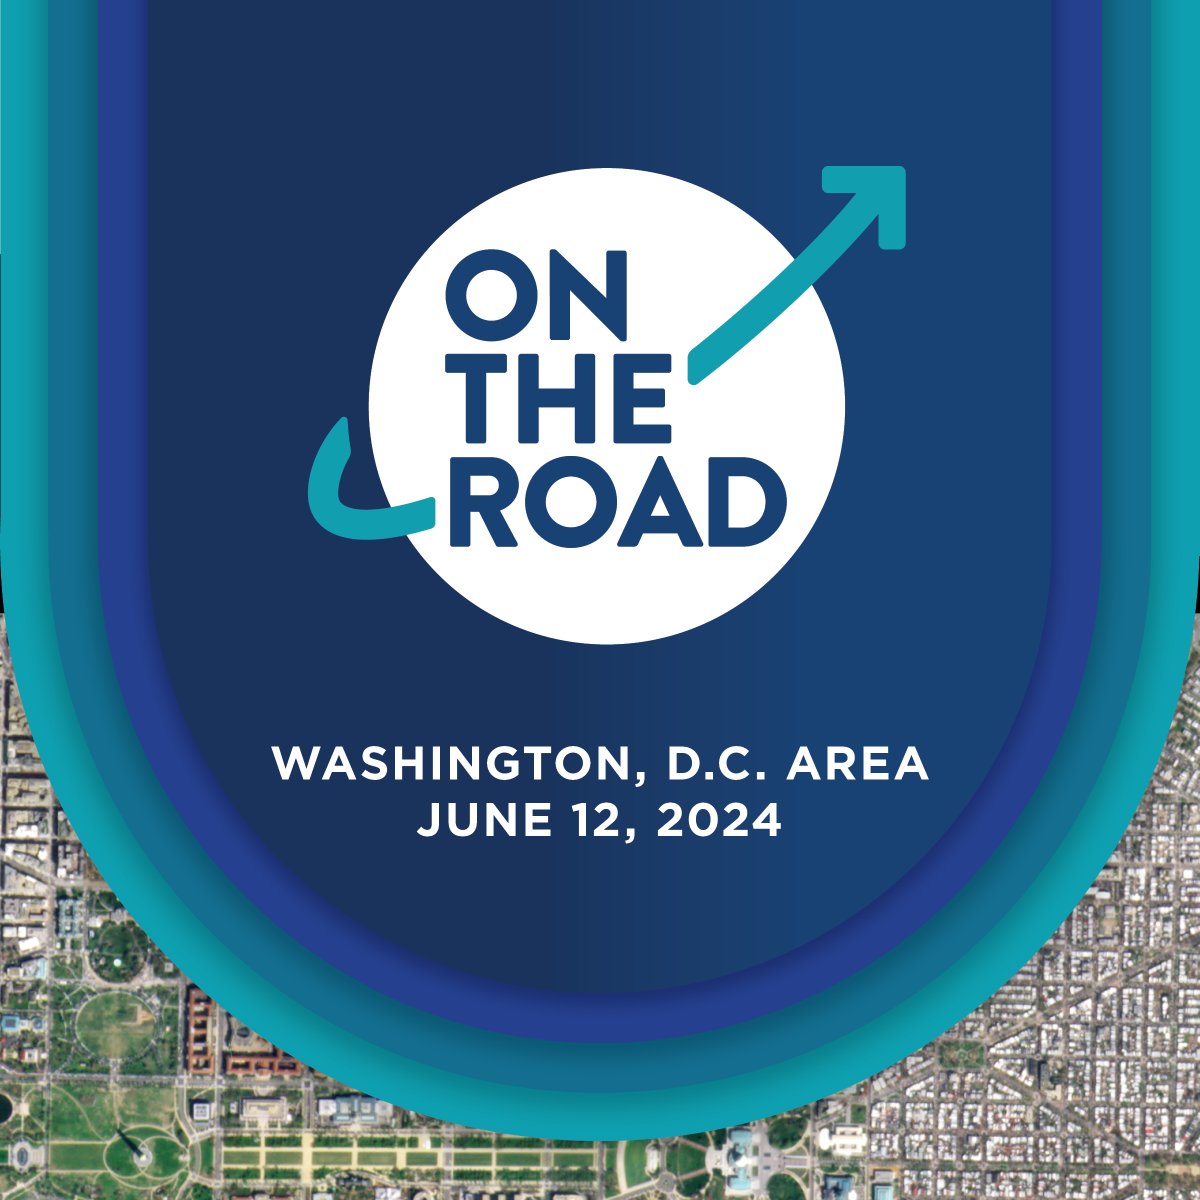 Our next stop on Planet’s “On The Road” tour: the Washington DC area! Join us June 12th for a day full of in-person keynotes, networking, & sessions on how #satellitedata is leveraged across industries from D&I to natural disaster risk mitigation: planet.com/on-the-road/dc…